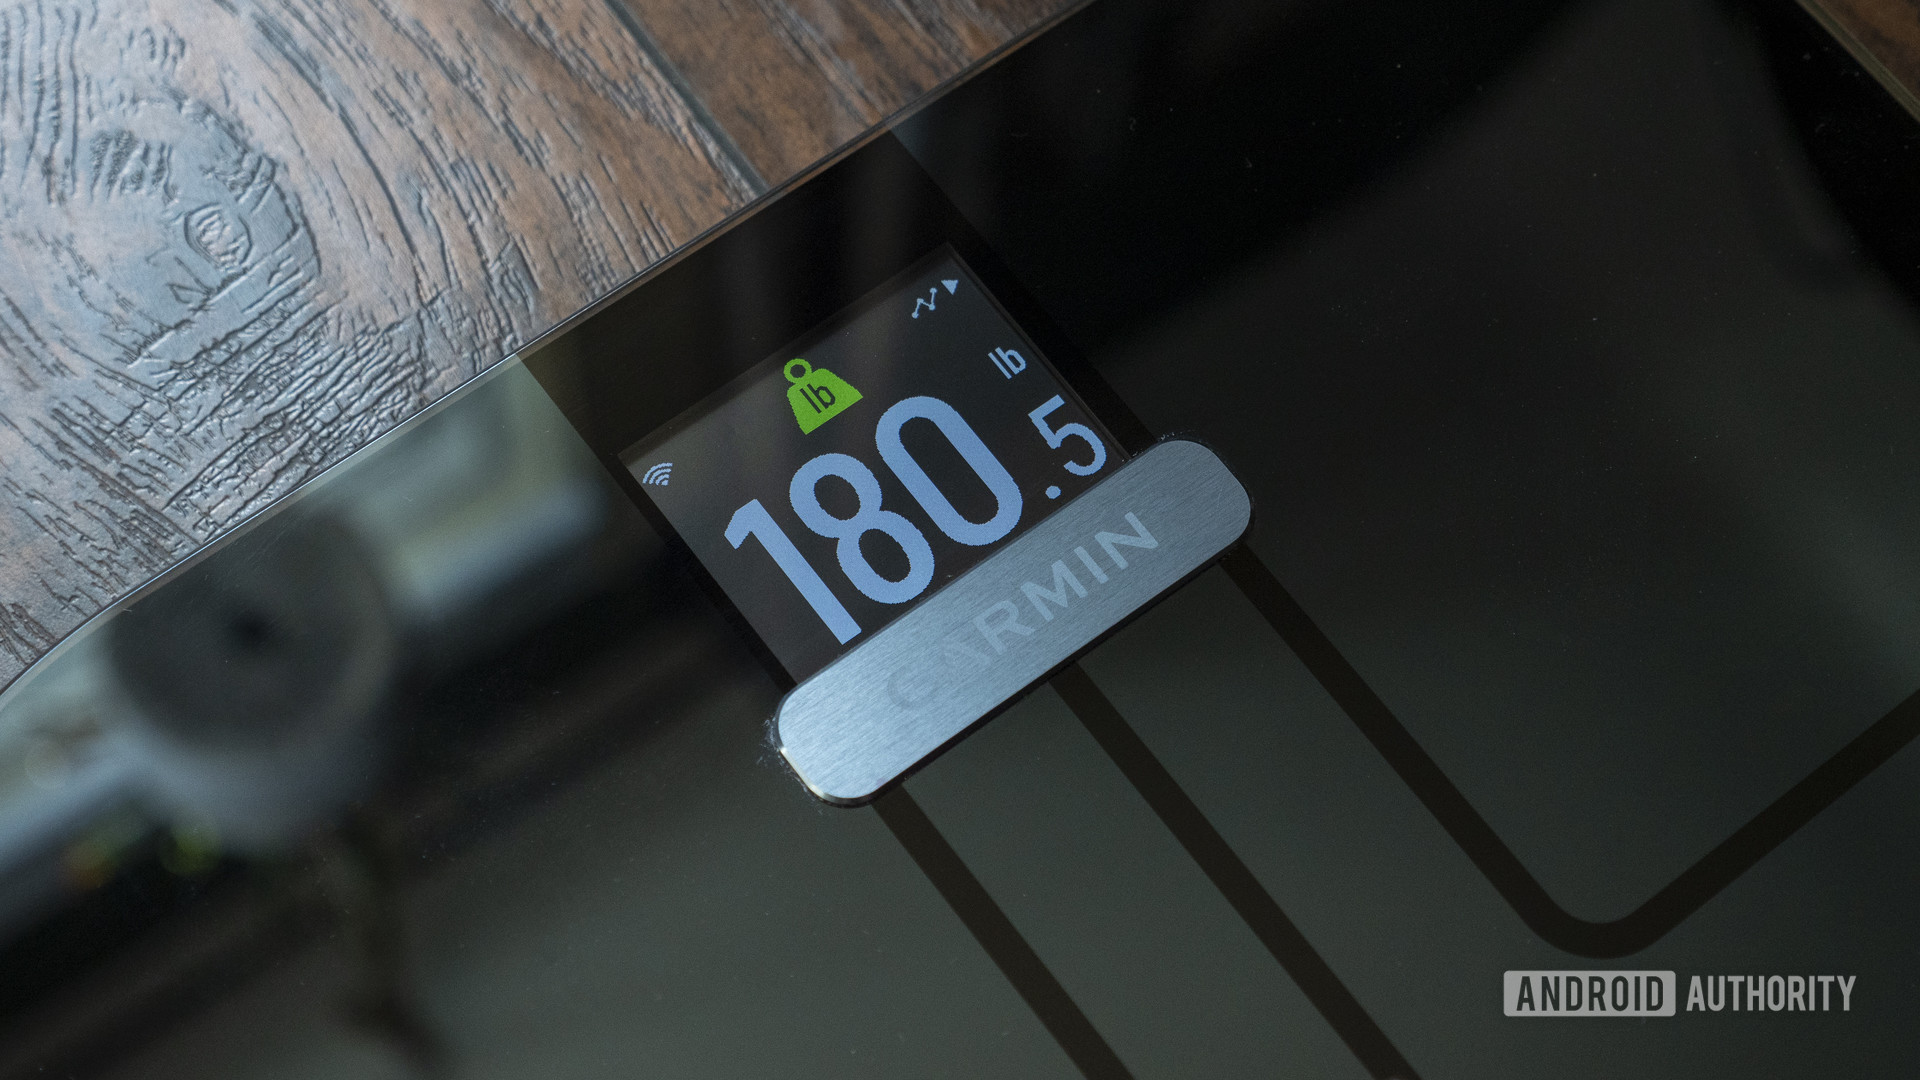 https://www.androidauthority.com/wp-content/uploads/2020/11/garmin-index-s2-smart-scale-review-weight.jpg